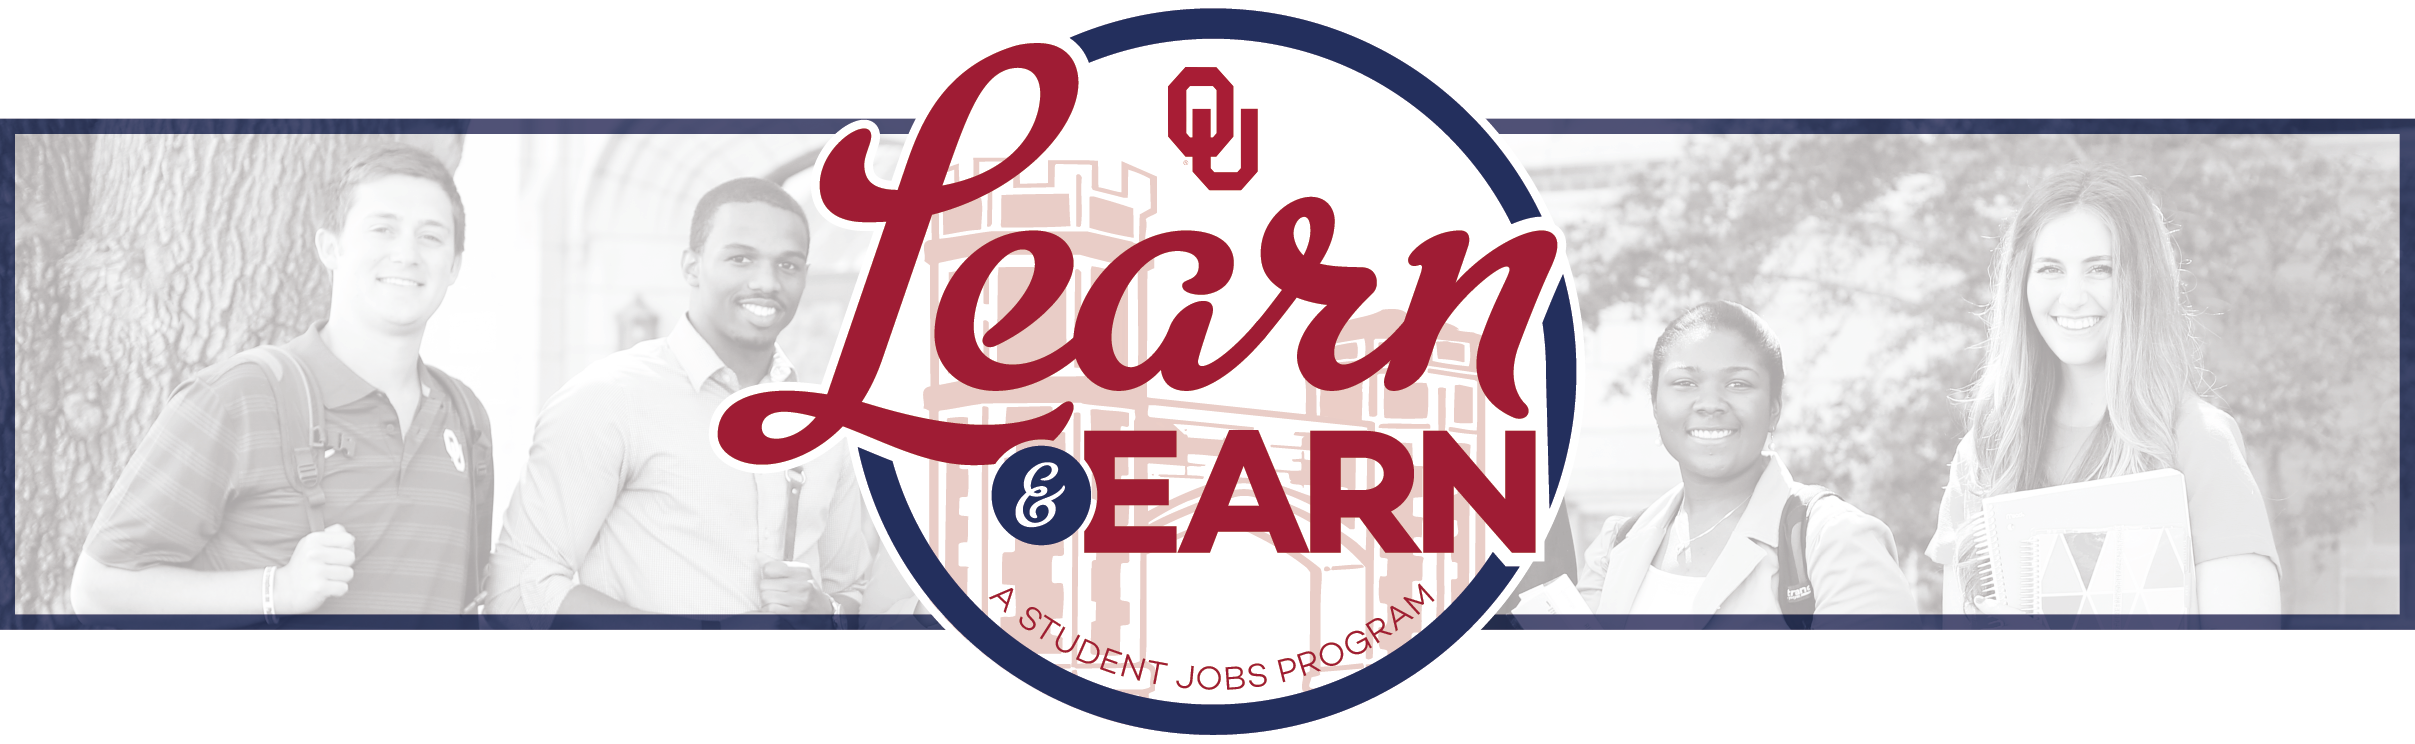 OU Learn & Earn logo with students in the background.